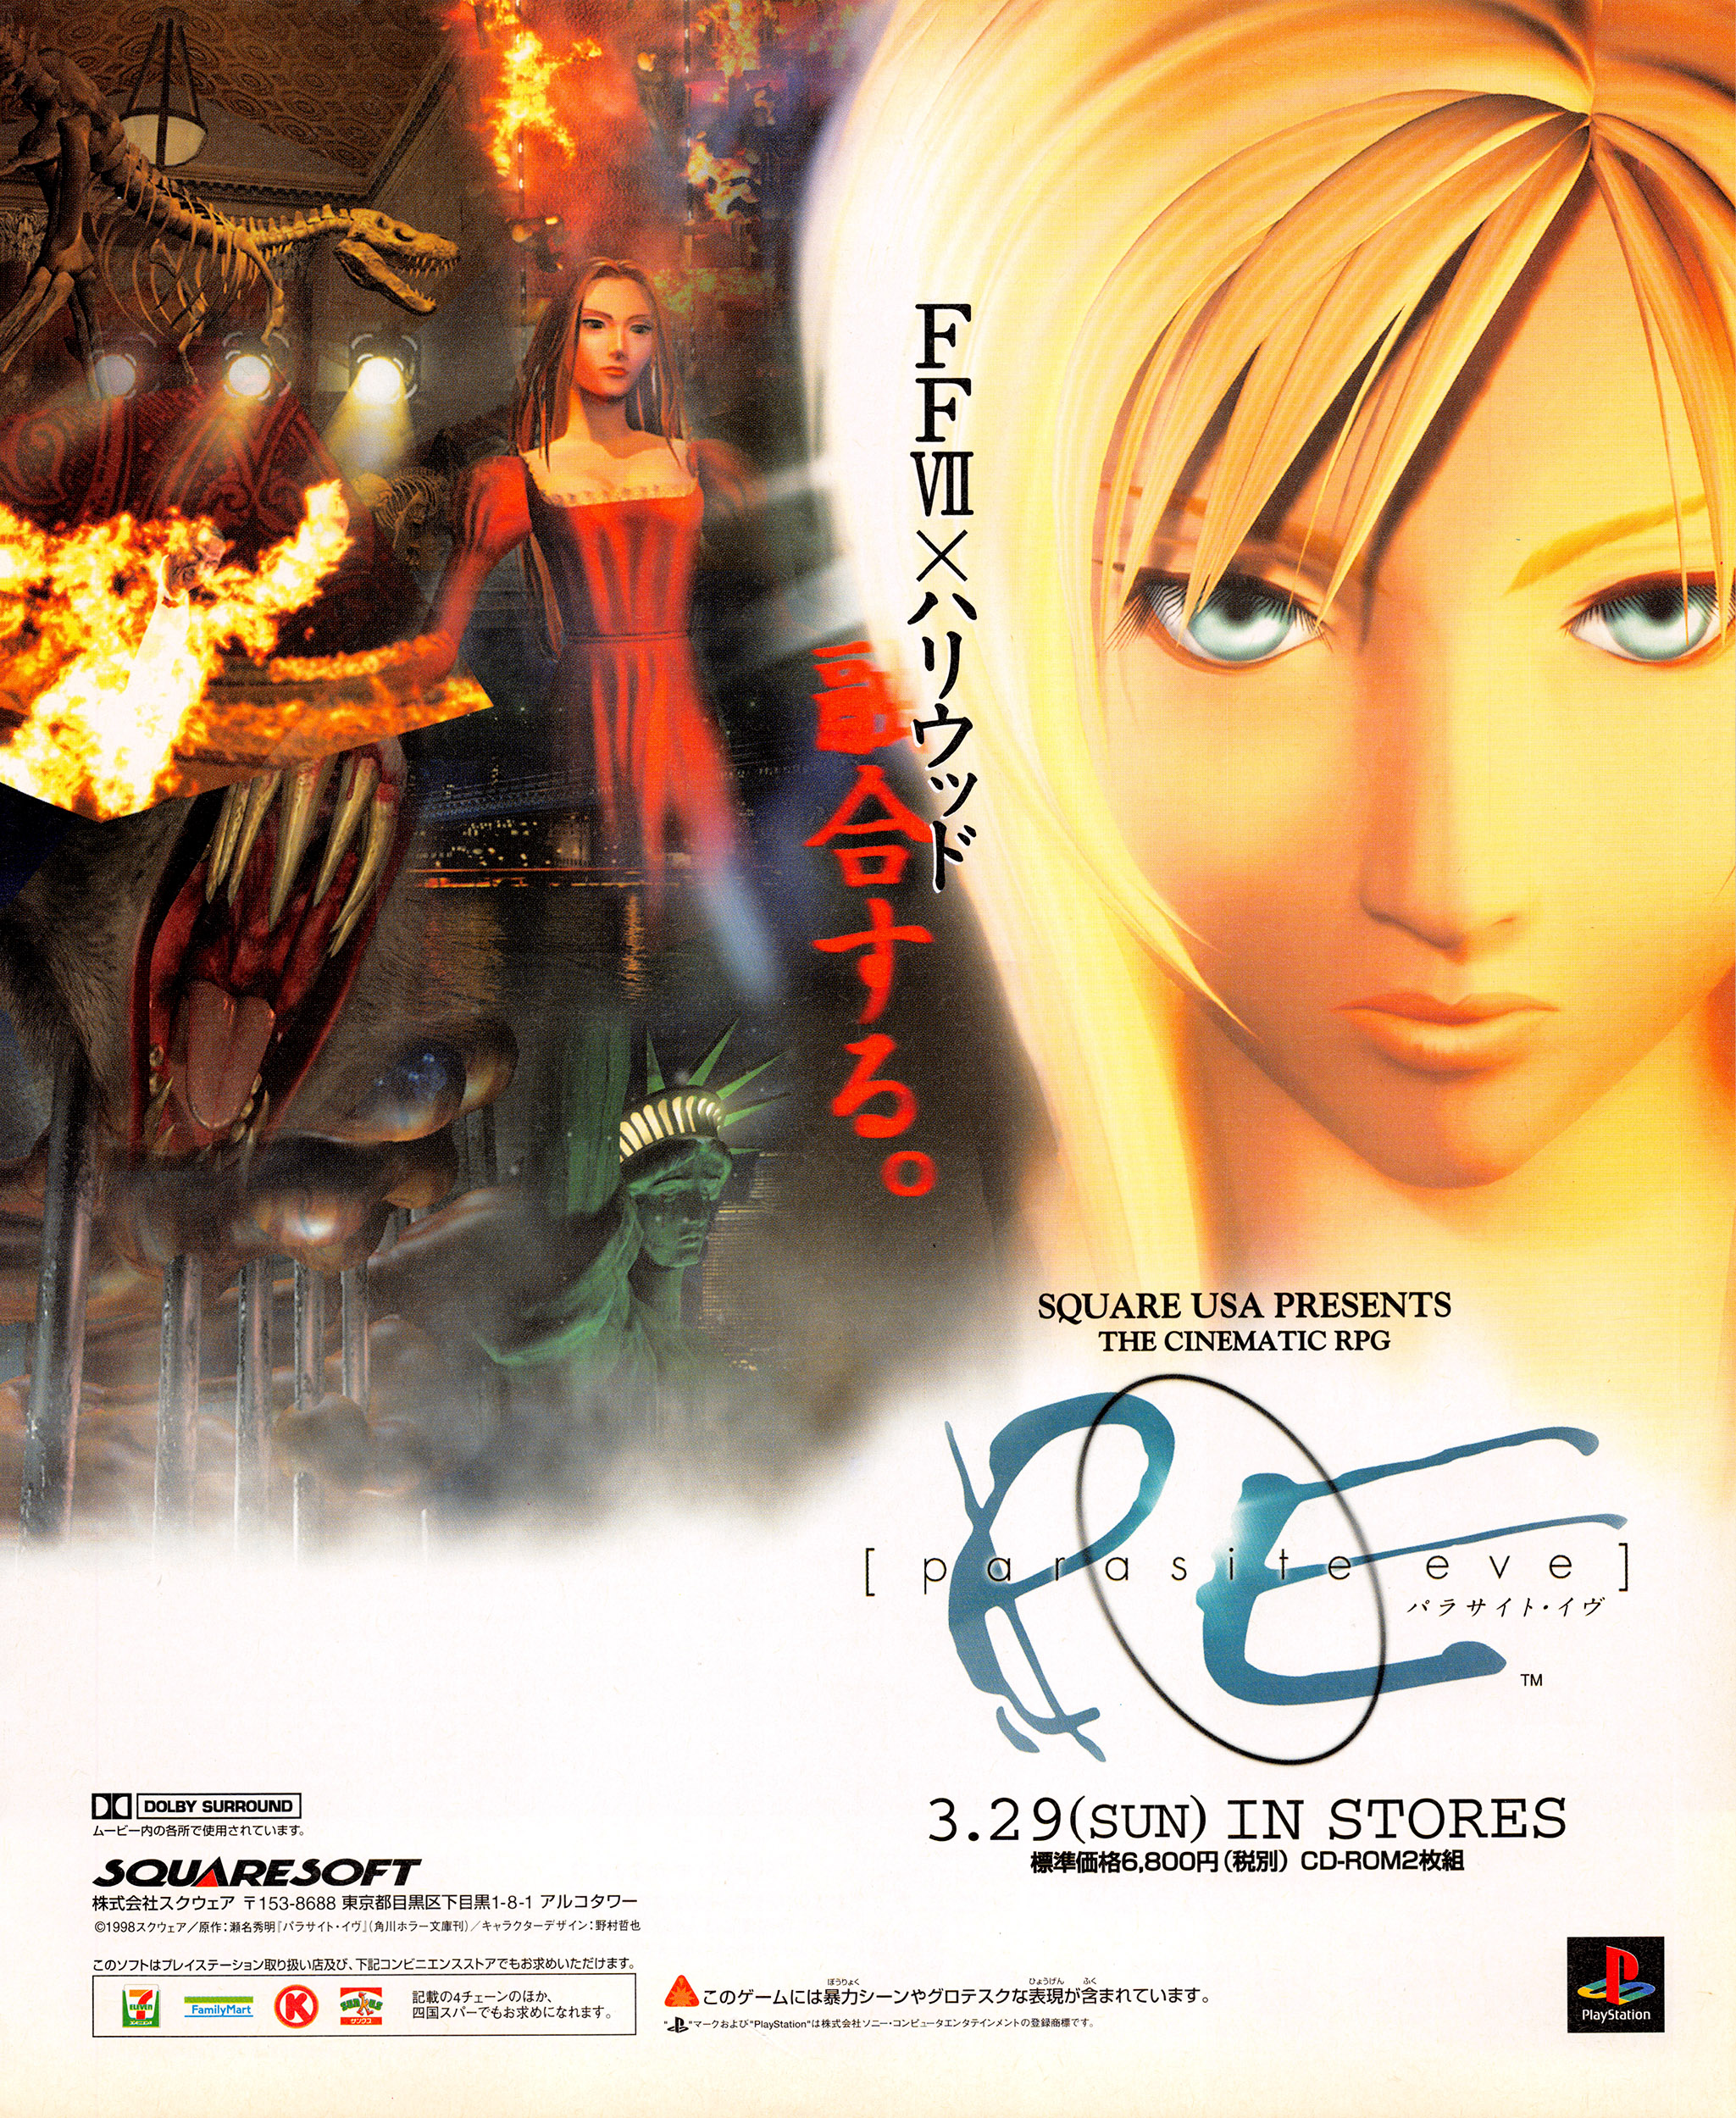 bsfree parasite eve 2 codes